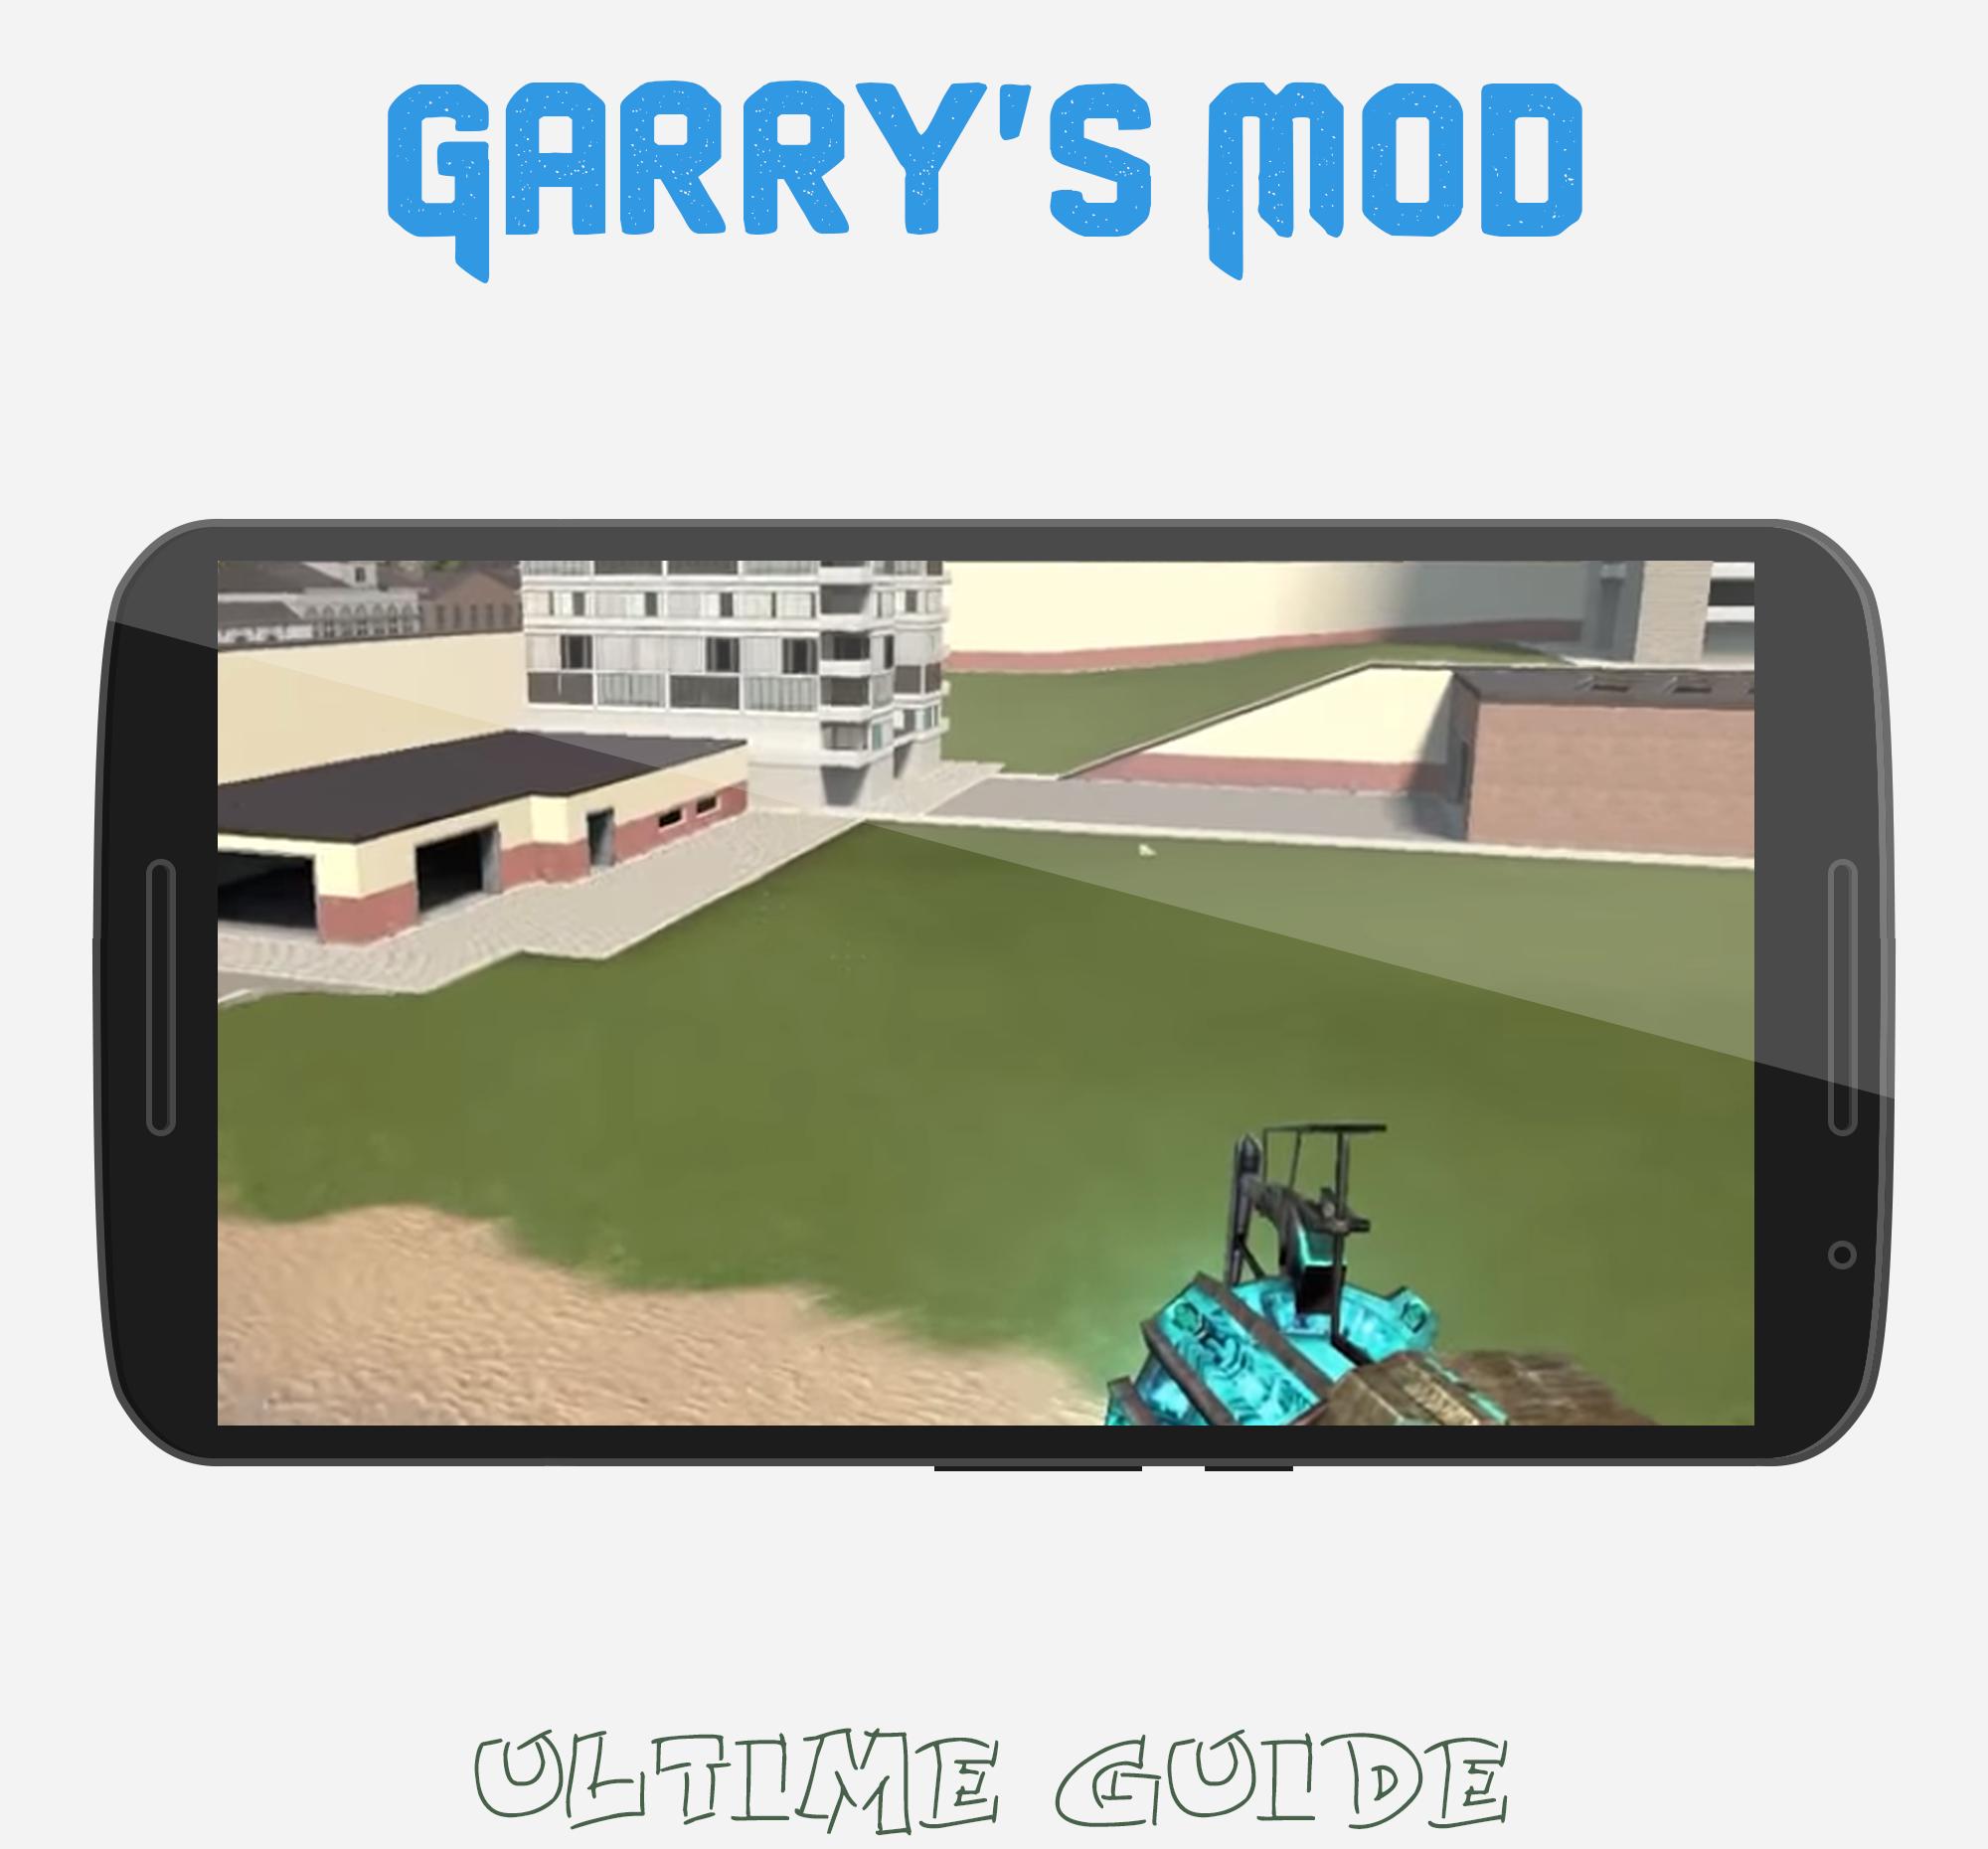 guide of Garry's mod Gmod Game for Android - APK Download - 